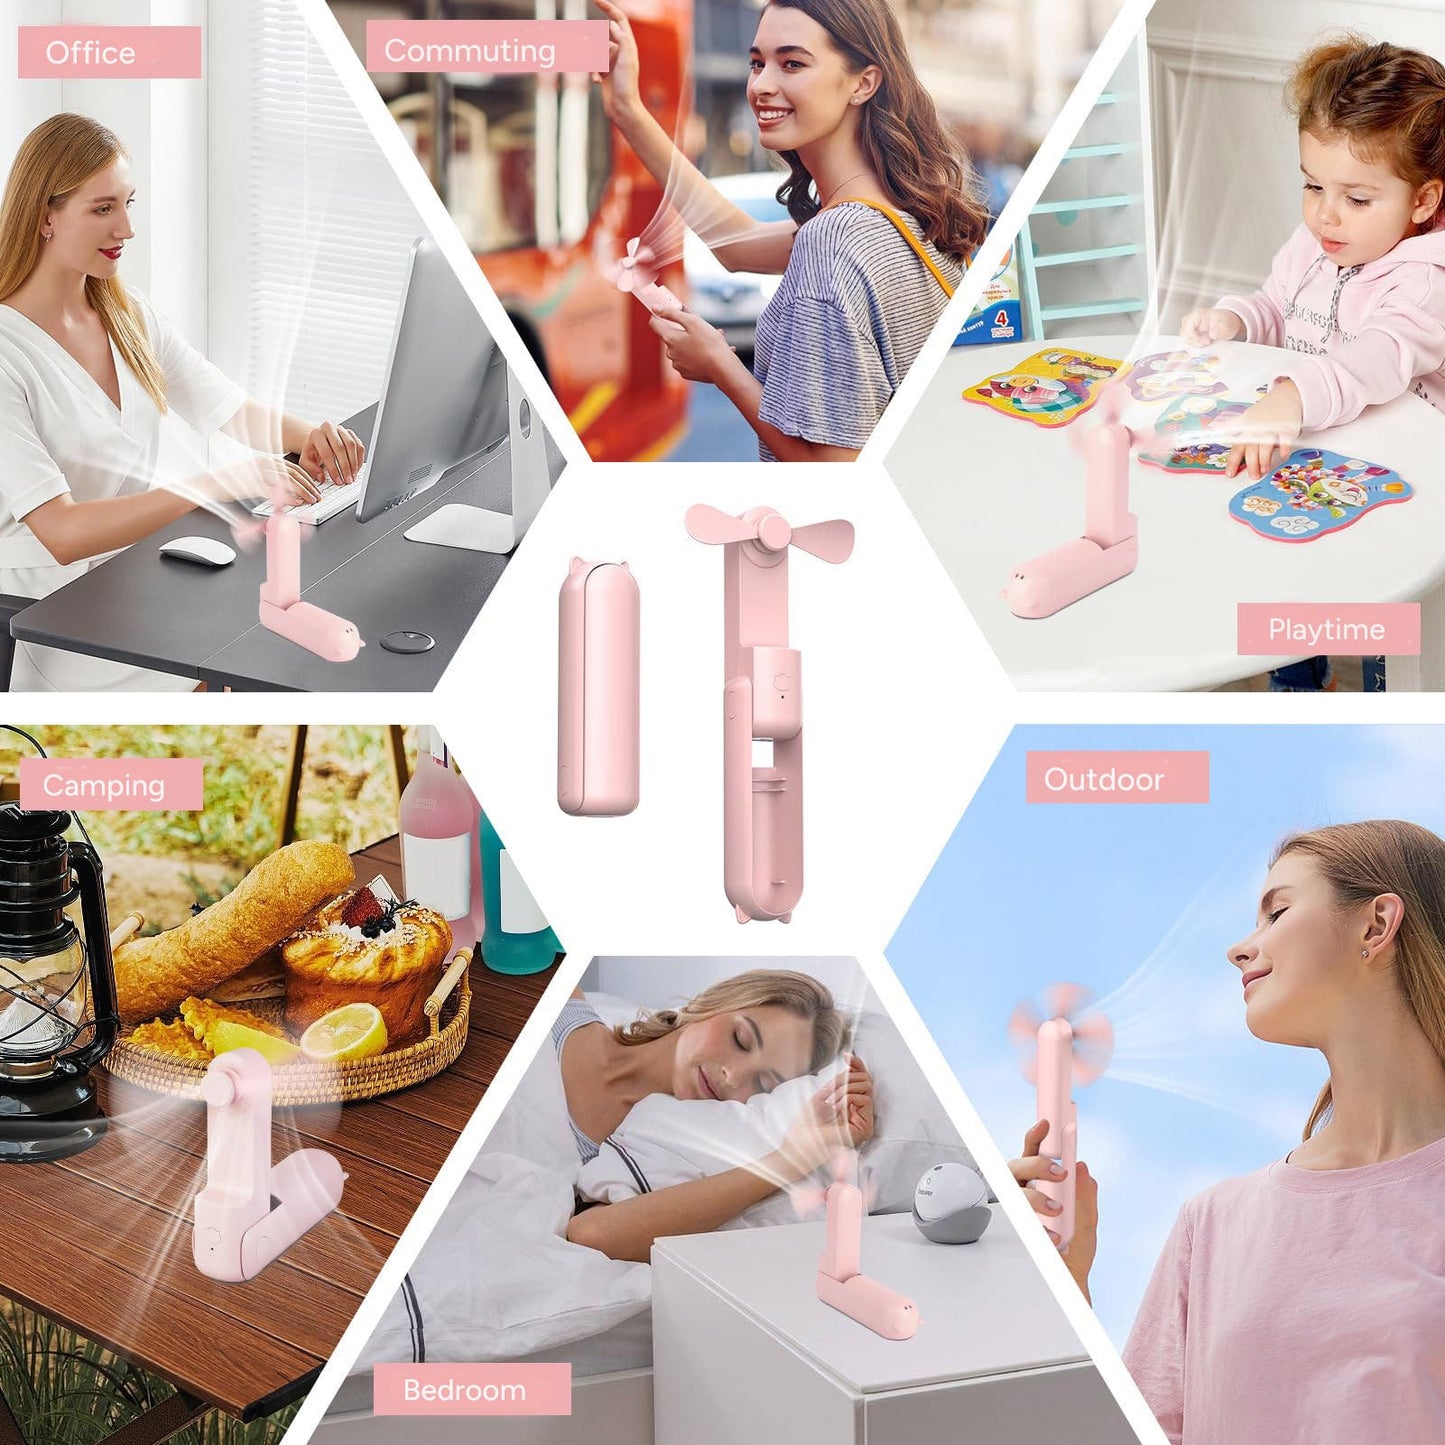 2-in-1 Portable USB Mini Fan and Power Bank (Pink)